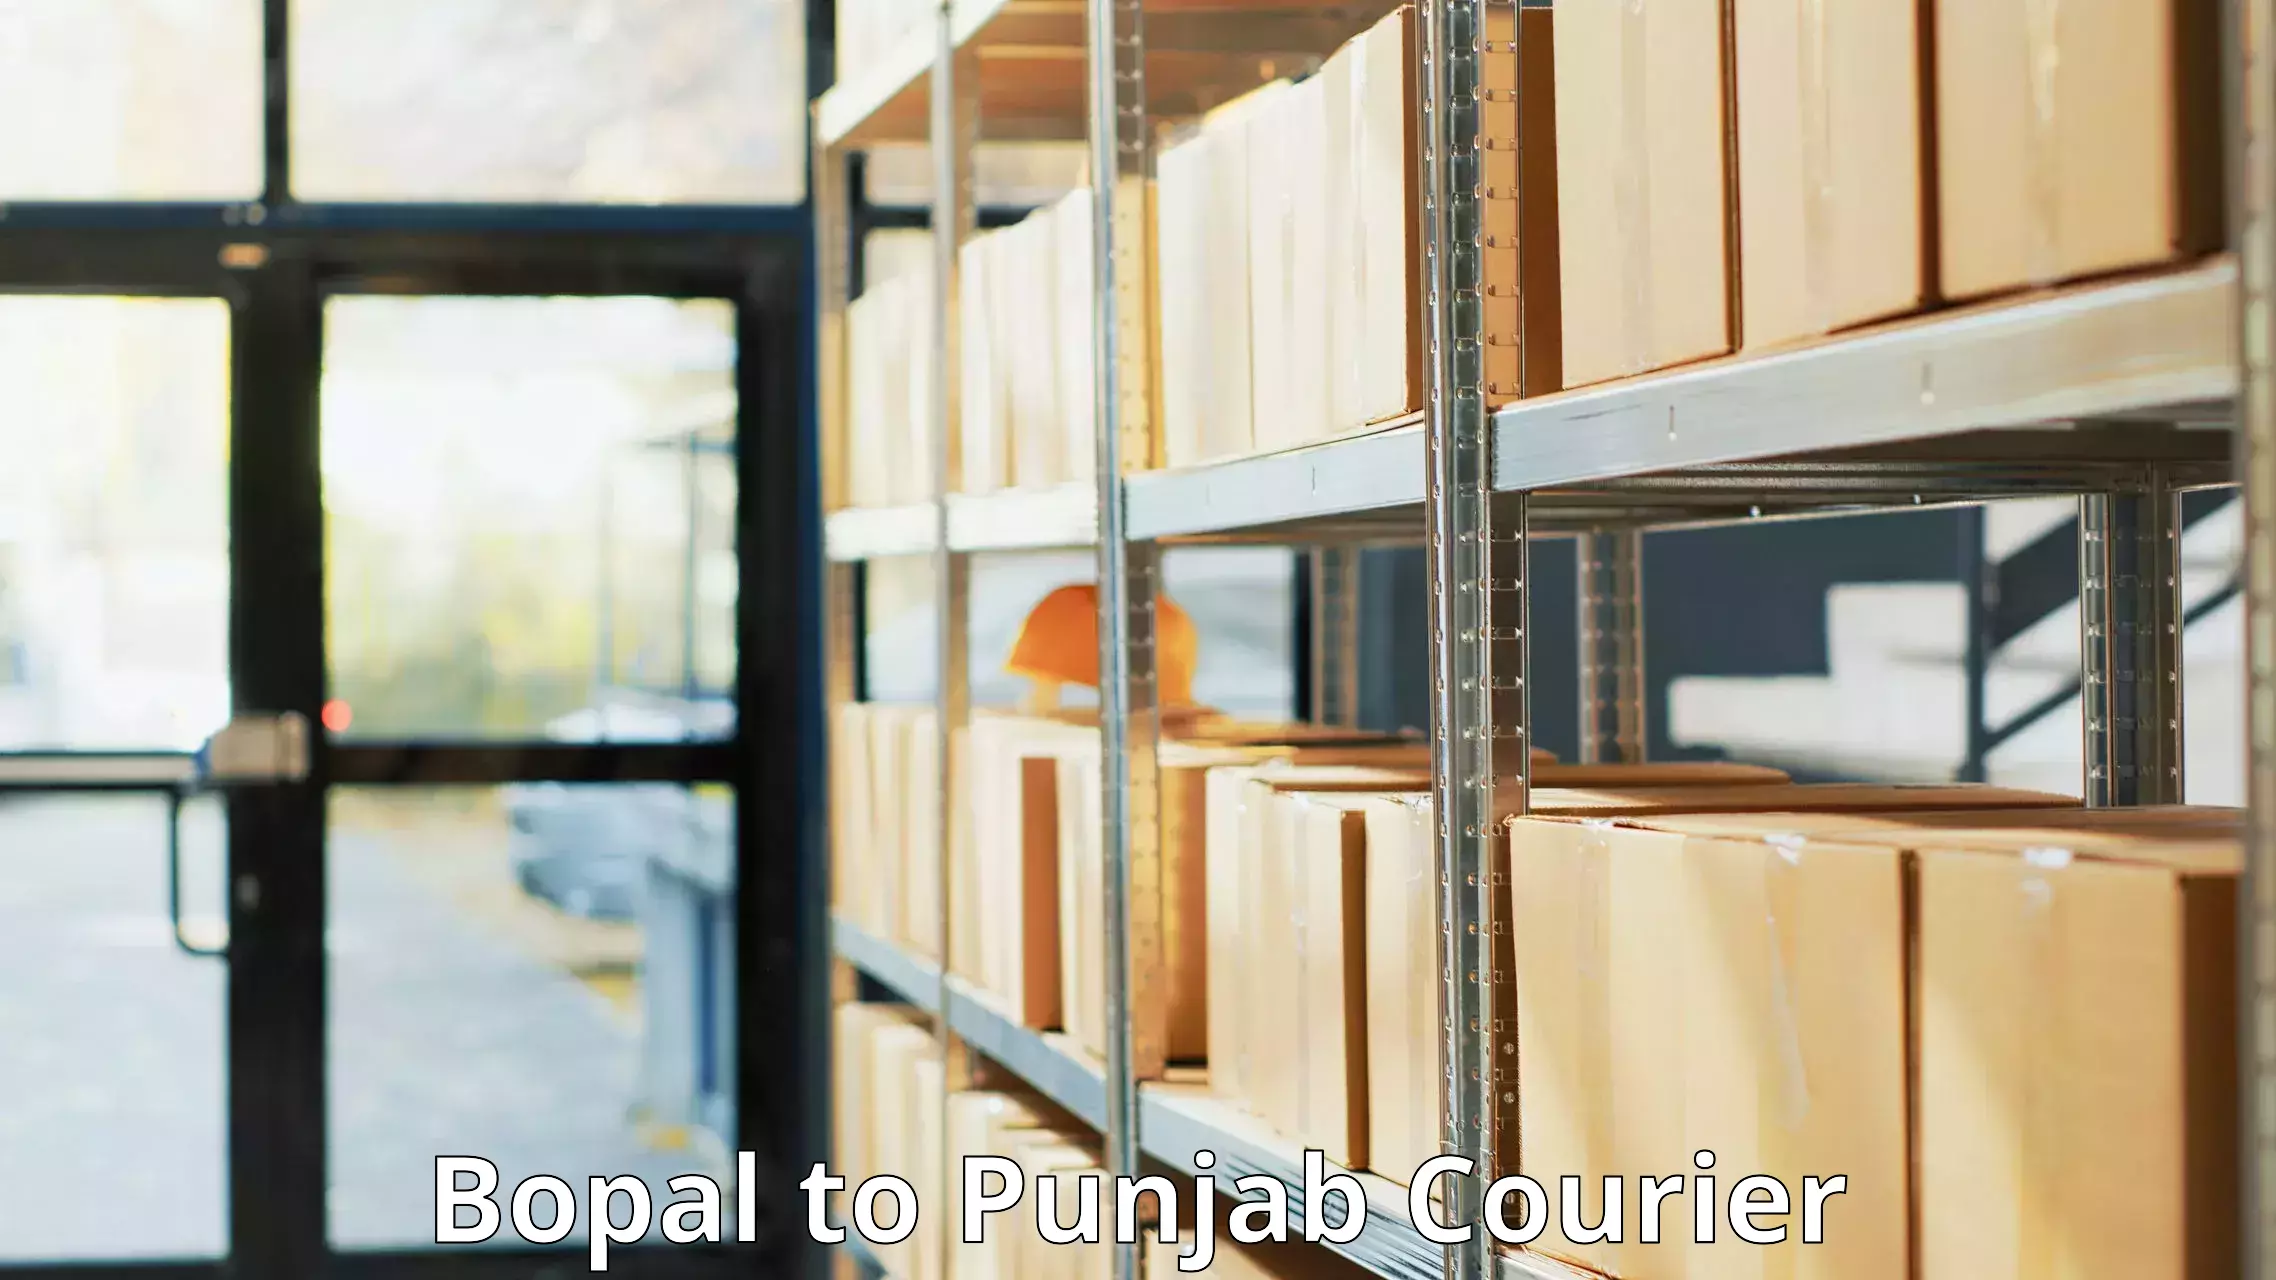 Reliable courier service Bopal to Malerkotla